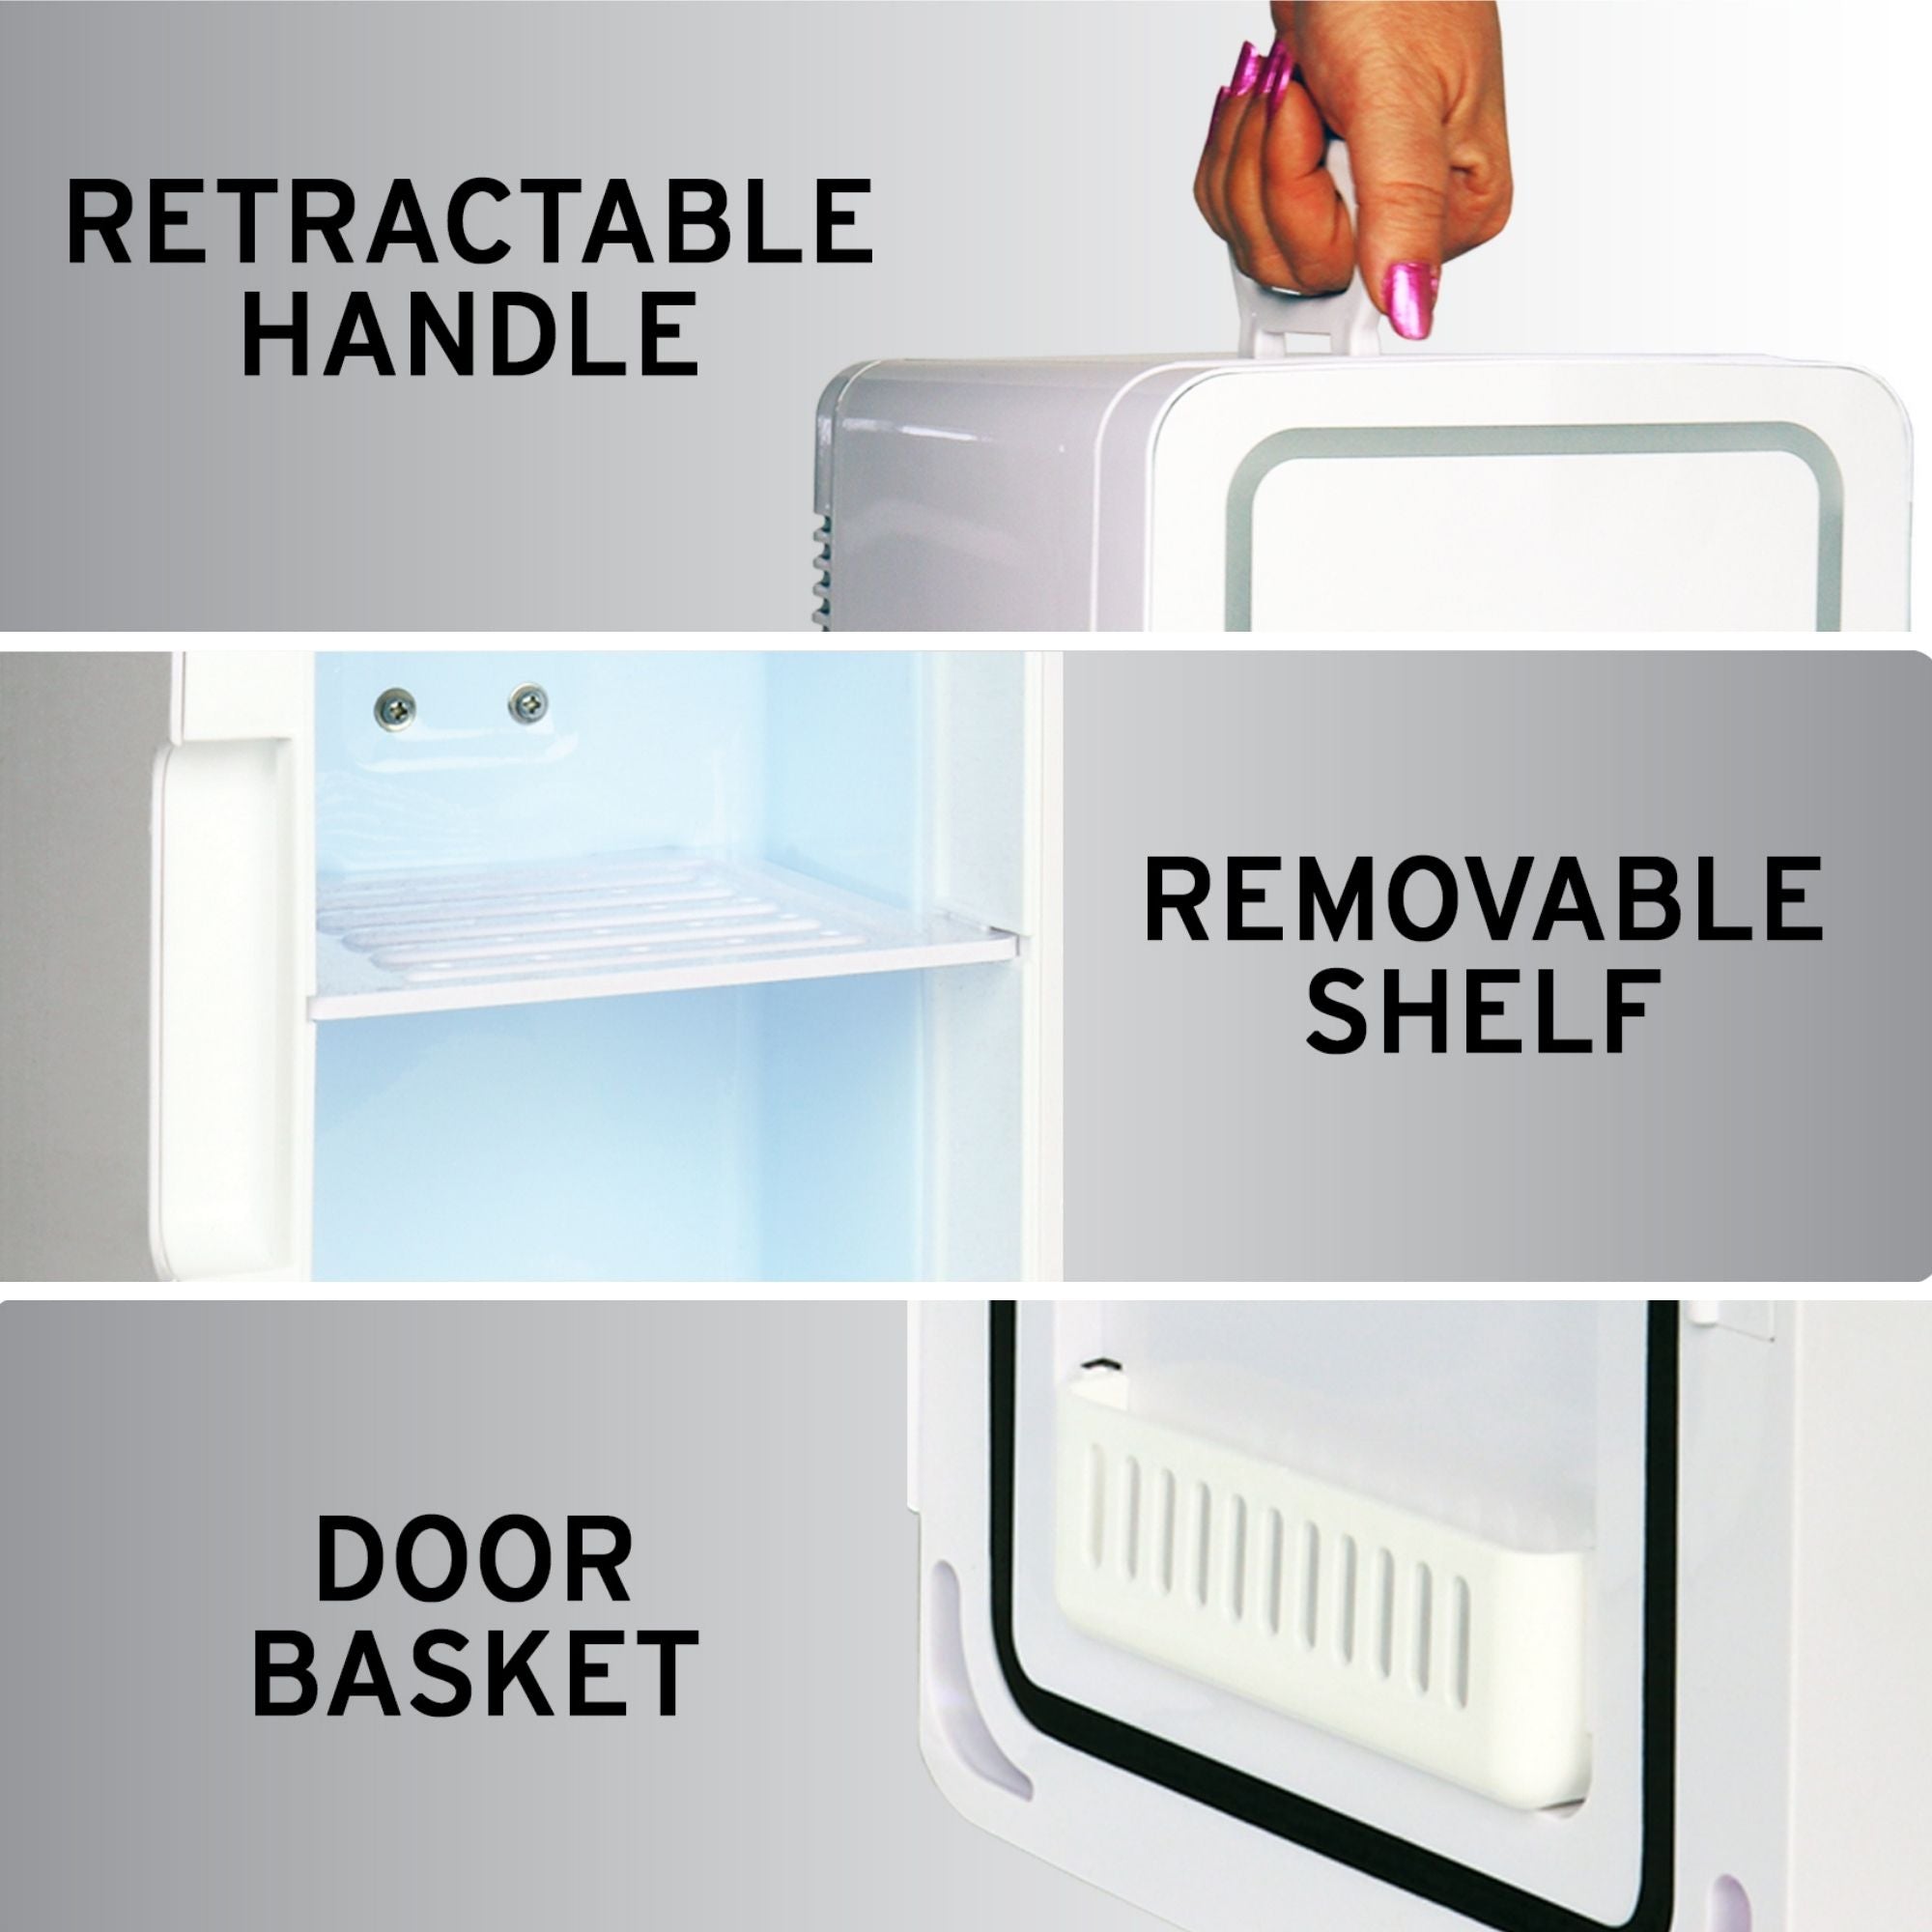 Three closeup images, labeled, show parts of the cosmetics fridge: 1. Retractable handle; 2. Removable shelf; 3. Door basket